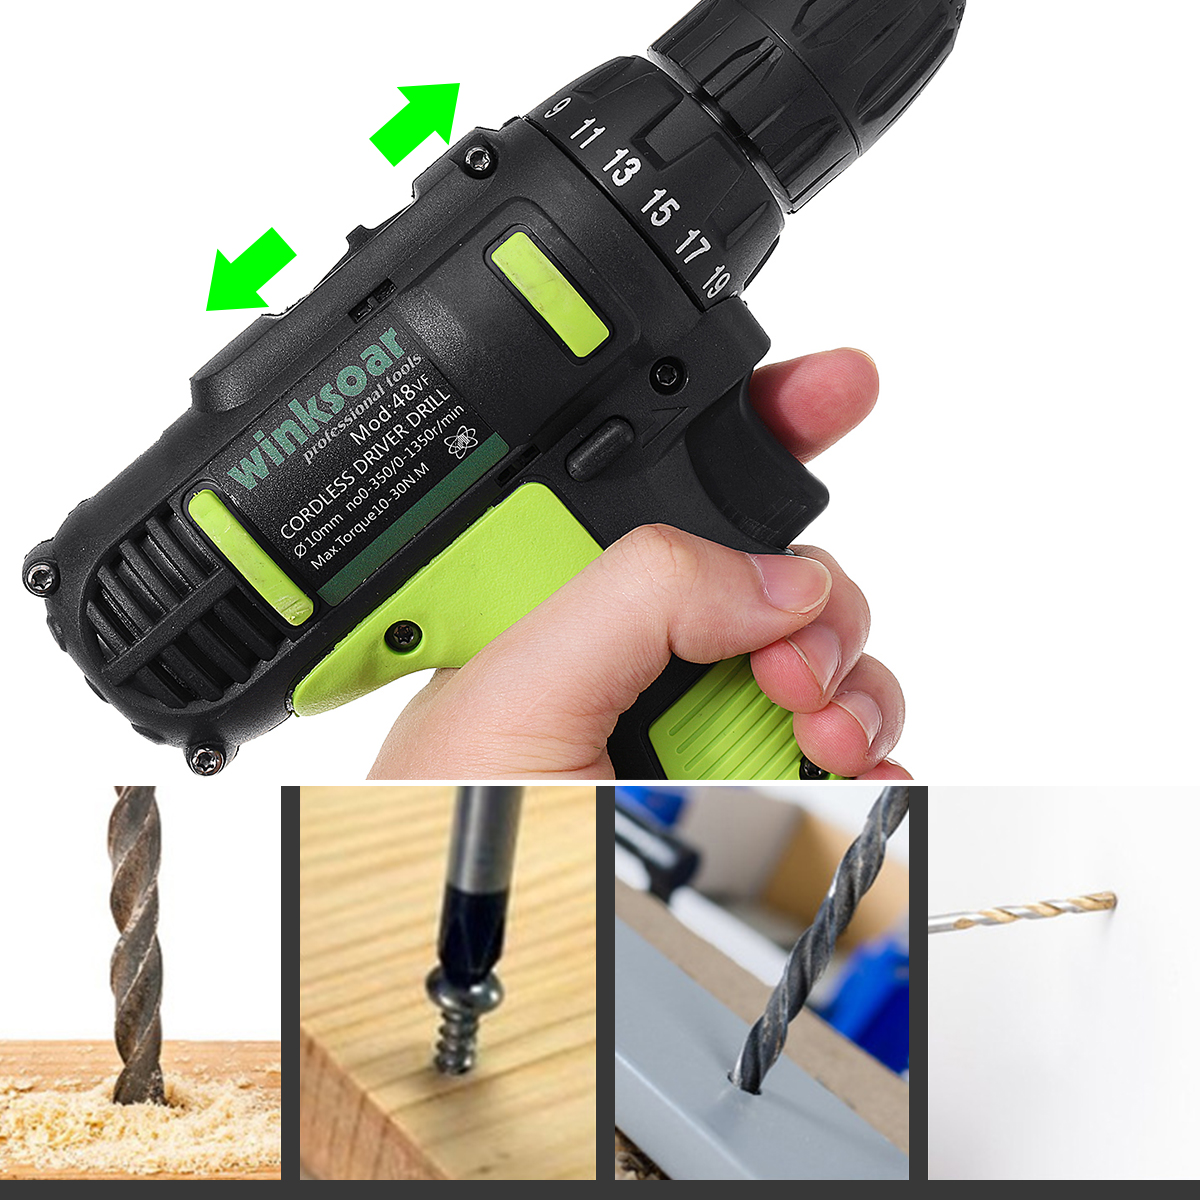 48VF-Cordless-Impact-Lithium-Electric-Drill-2-Speed-Electric-Hand-Drill-LED-lighting-12Pcs-Large-Cap-1555381-3